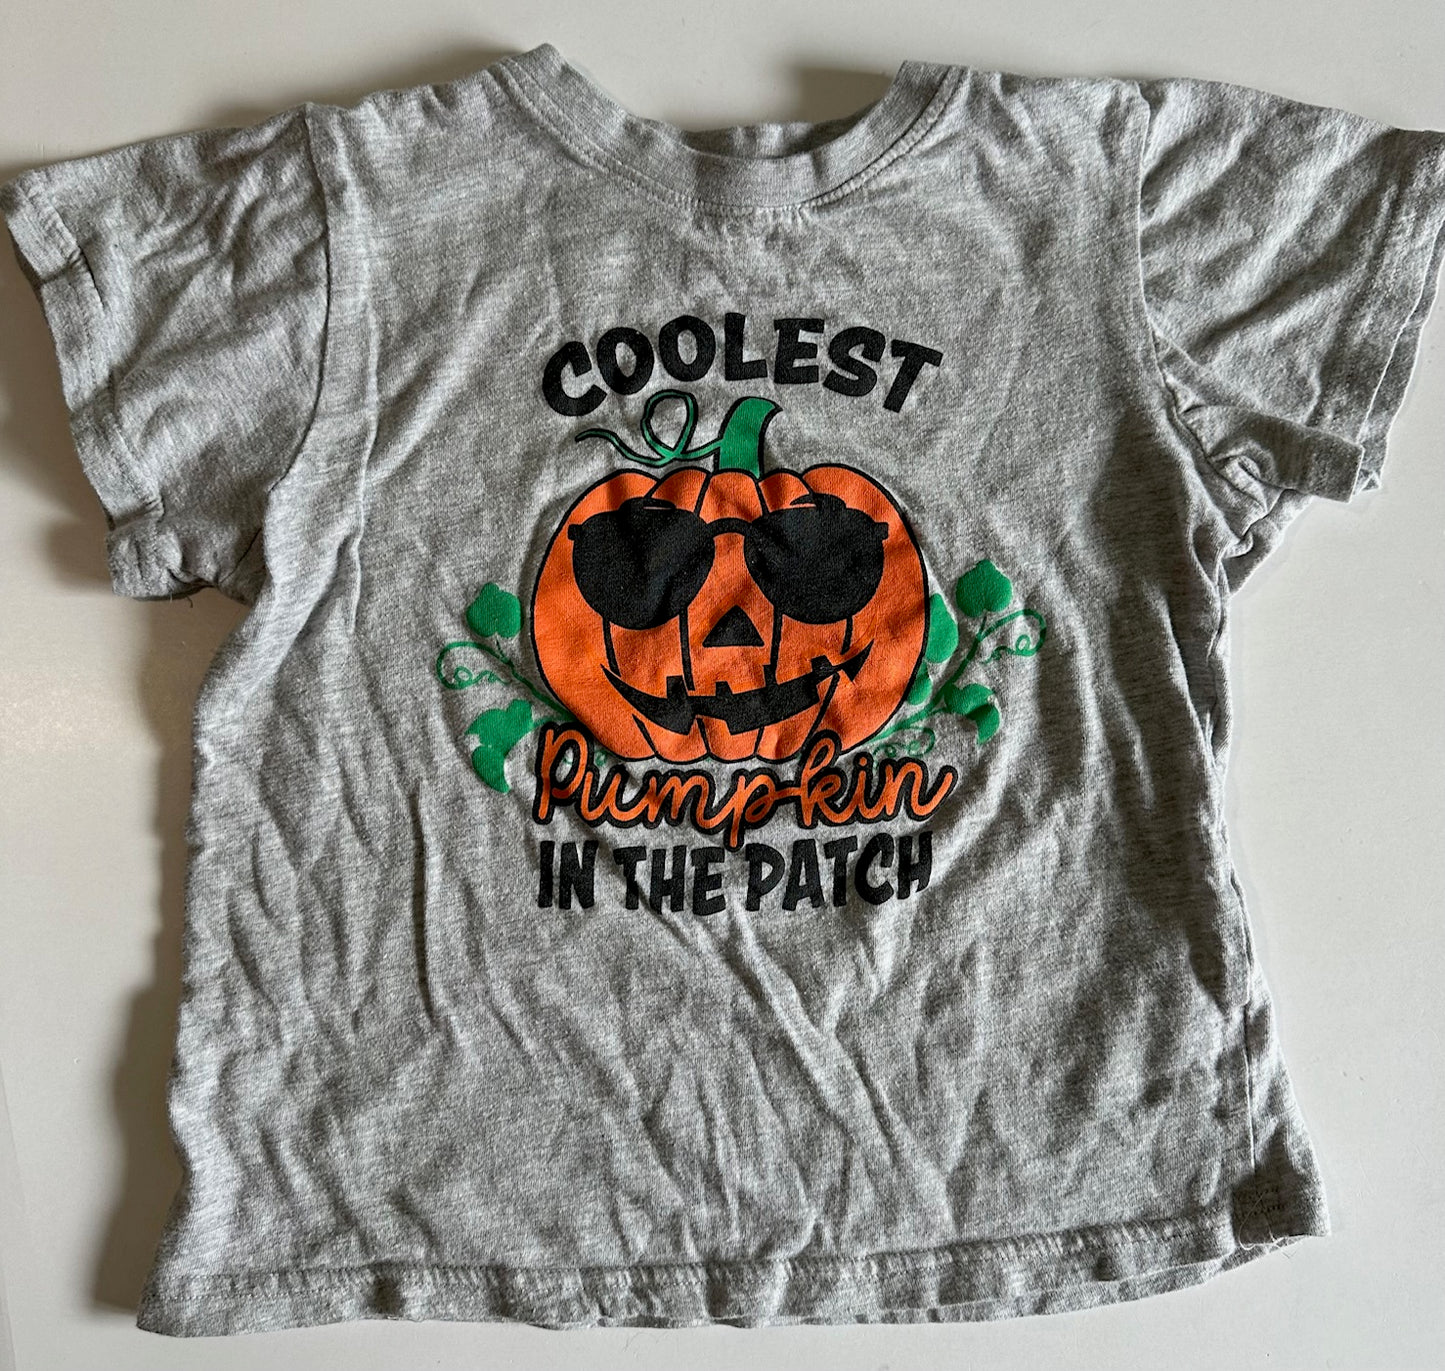 *Play* Unknown Brand, "Coolest Pumpkin in the Patch" T-Shirt - Size Medium (4-5)